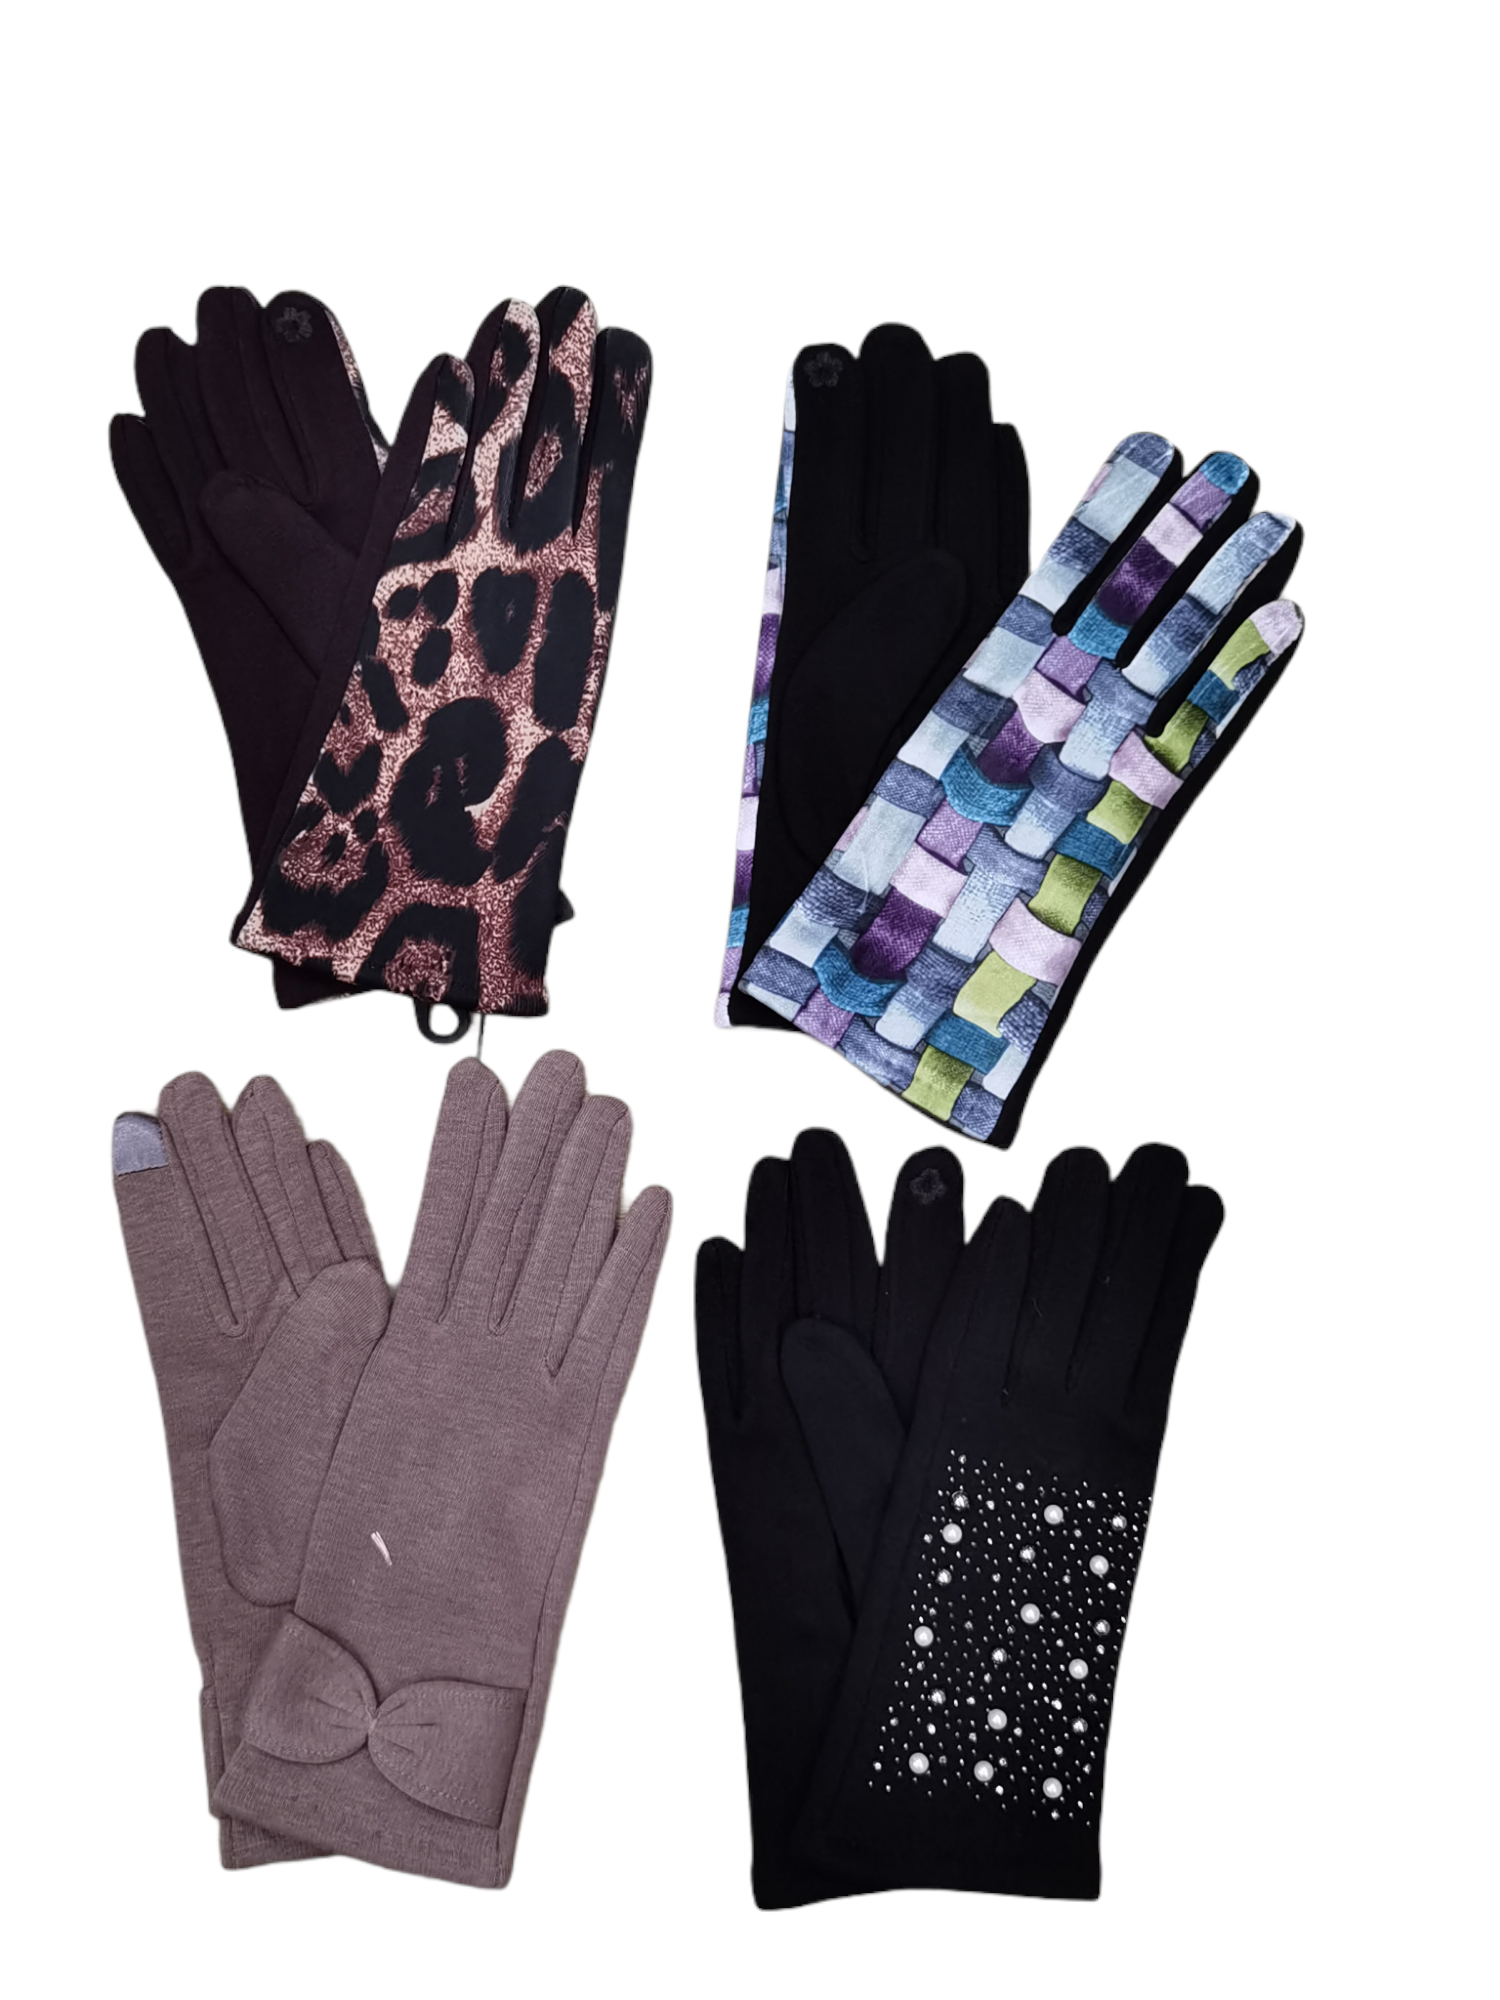 Tactile gloves mixed patterns and colors (x12)